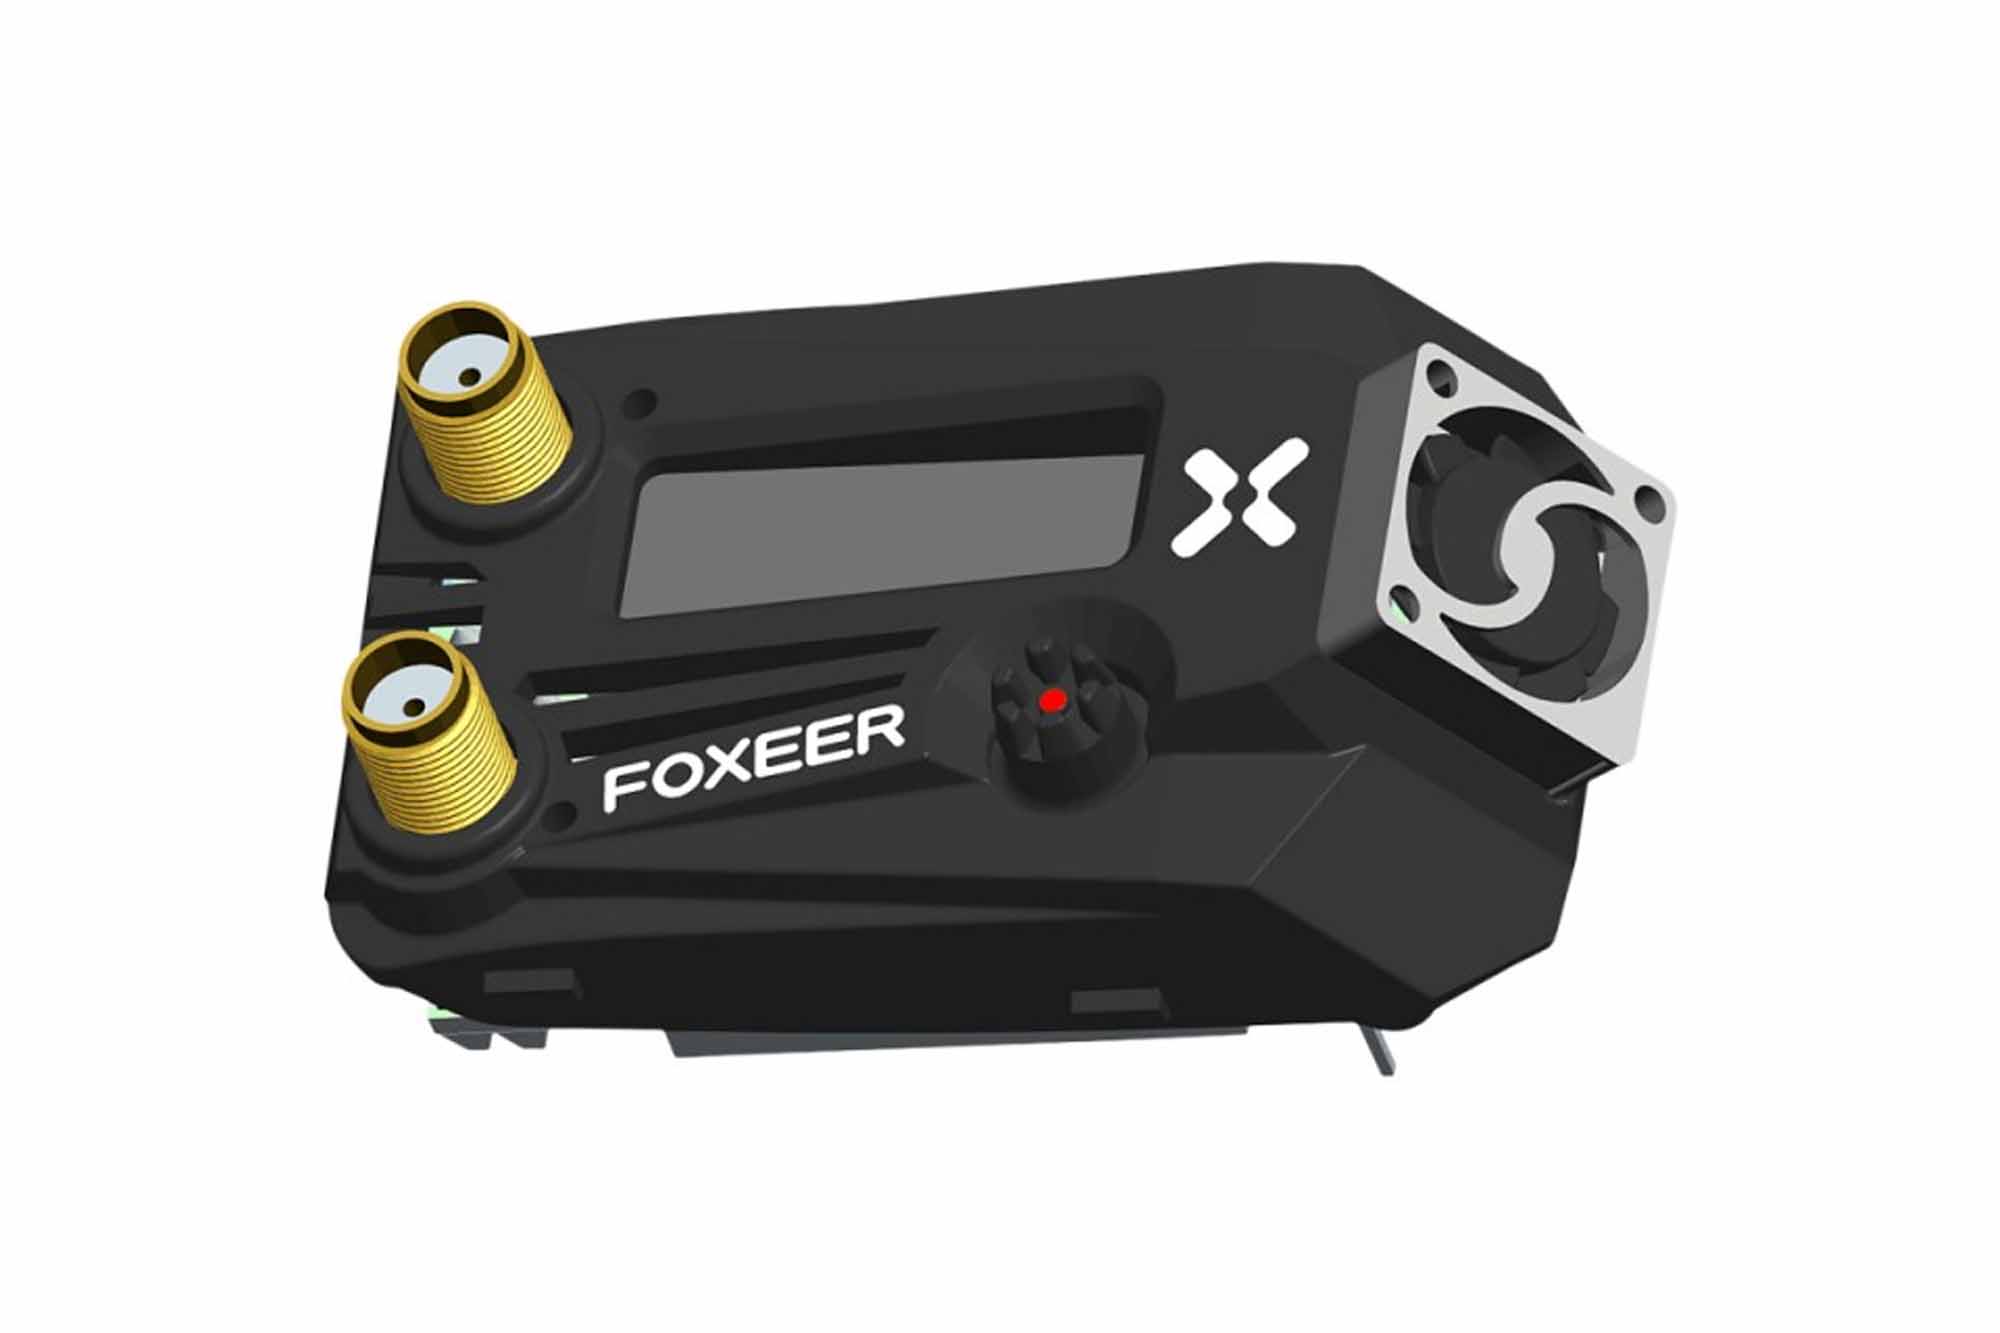 Foxeer Wildfire 5.8GHz 72CH Dual Receiver